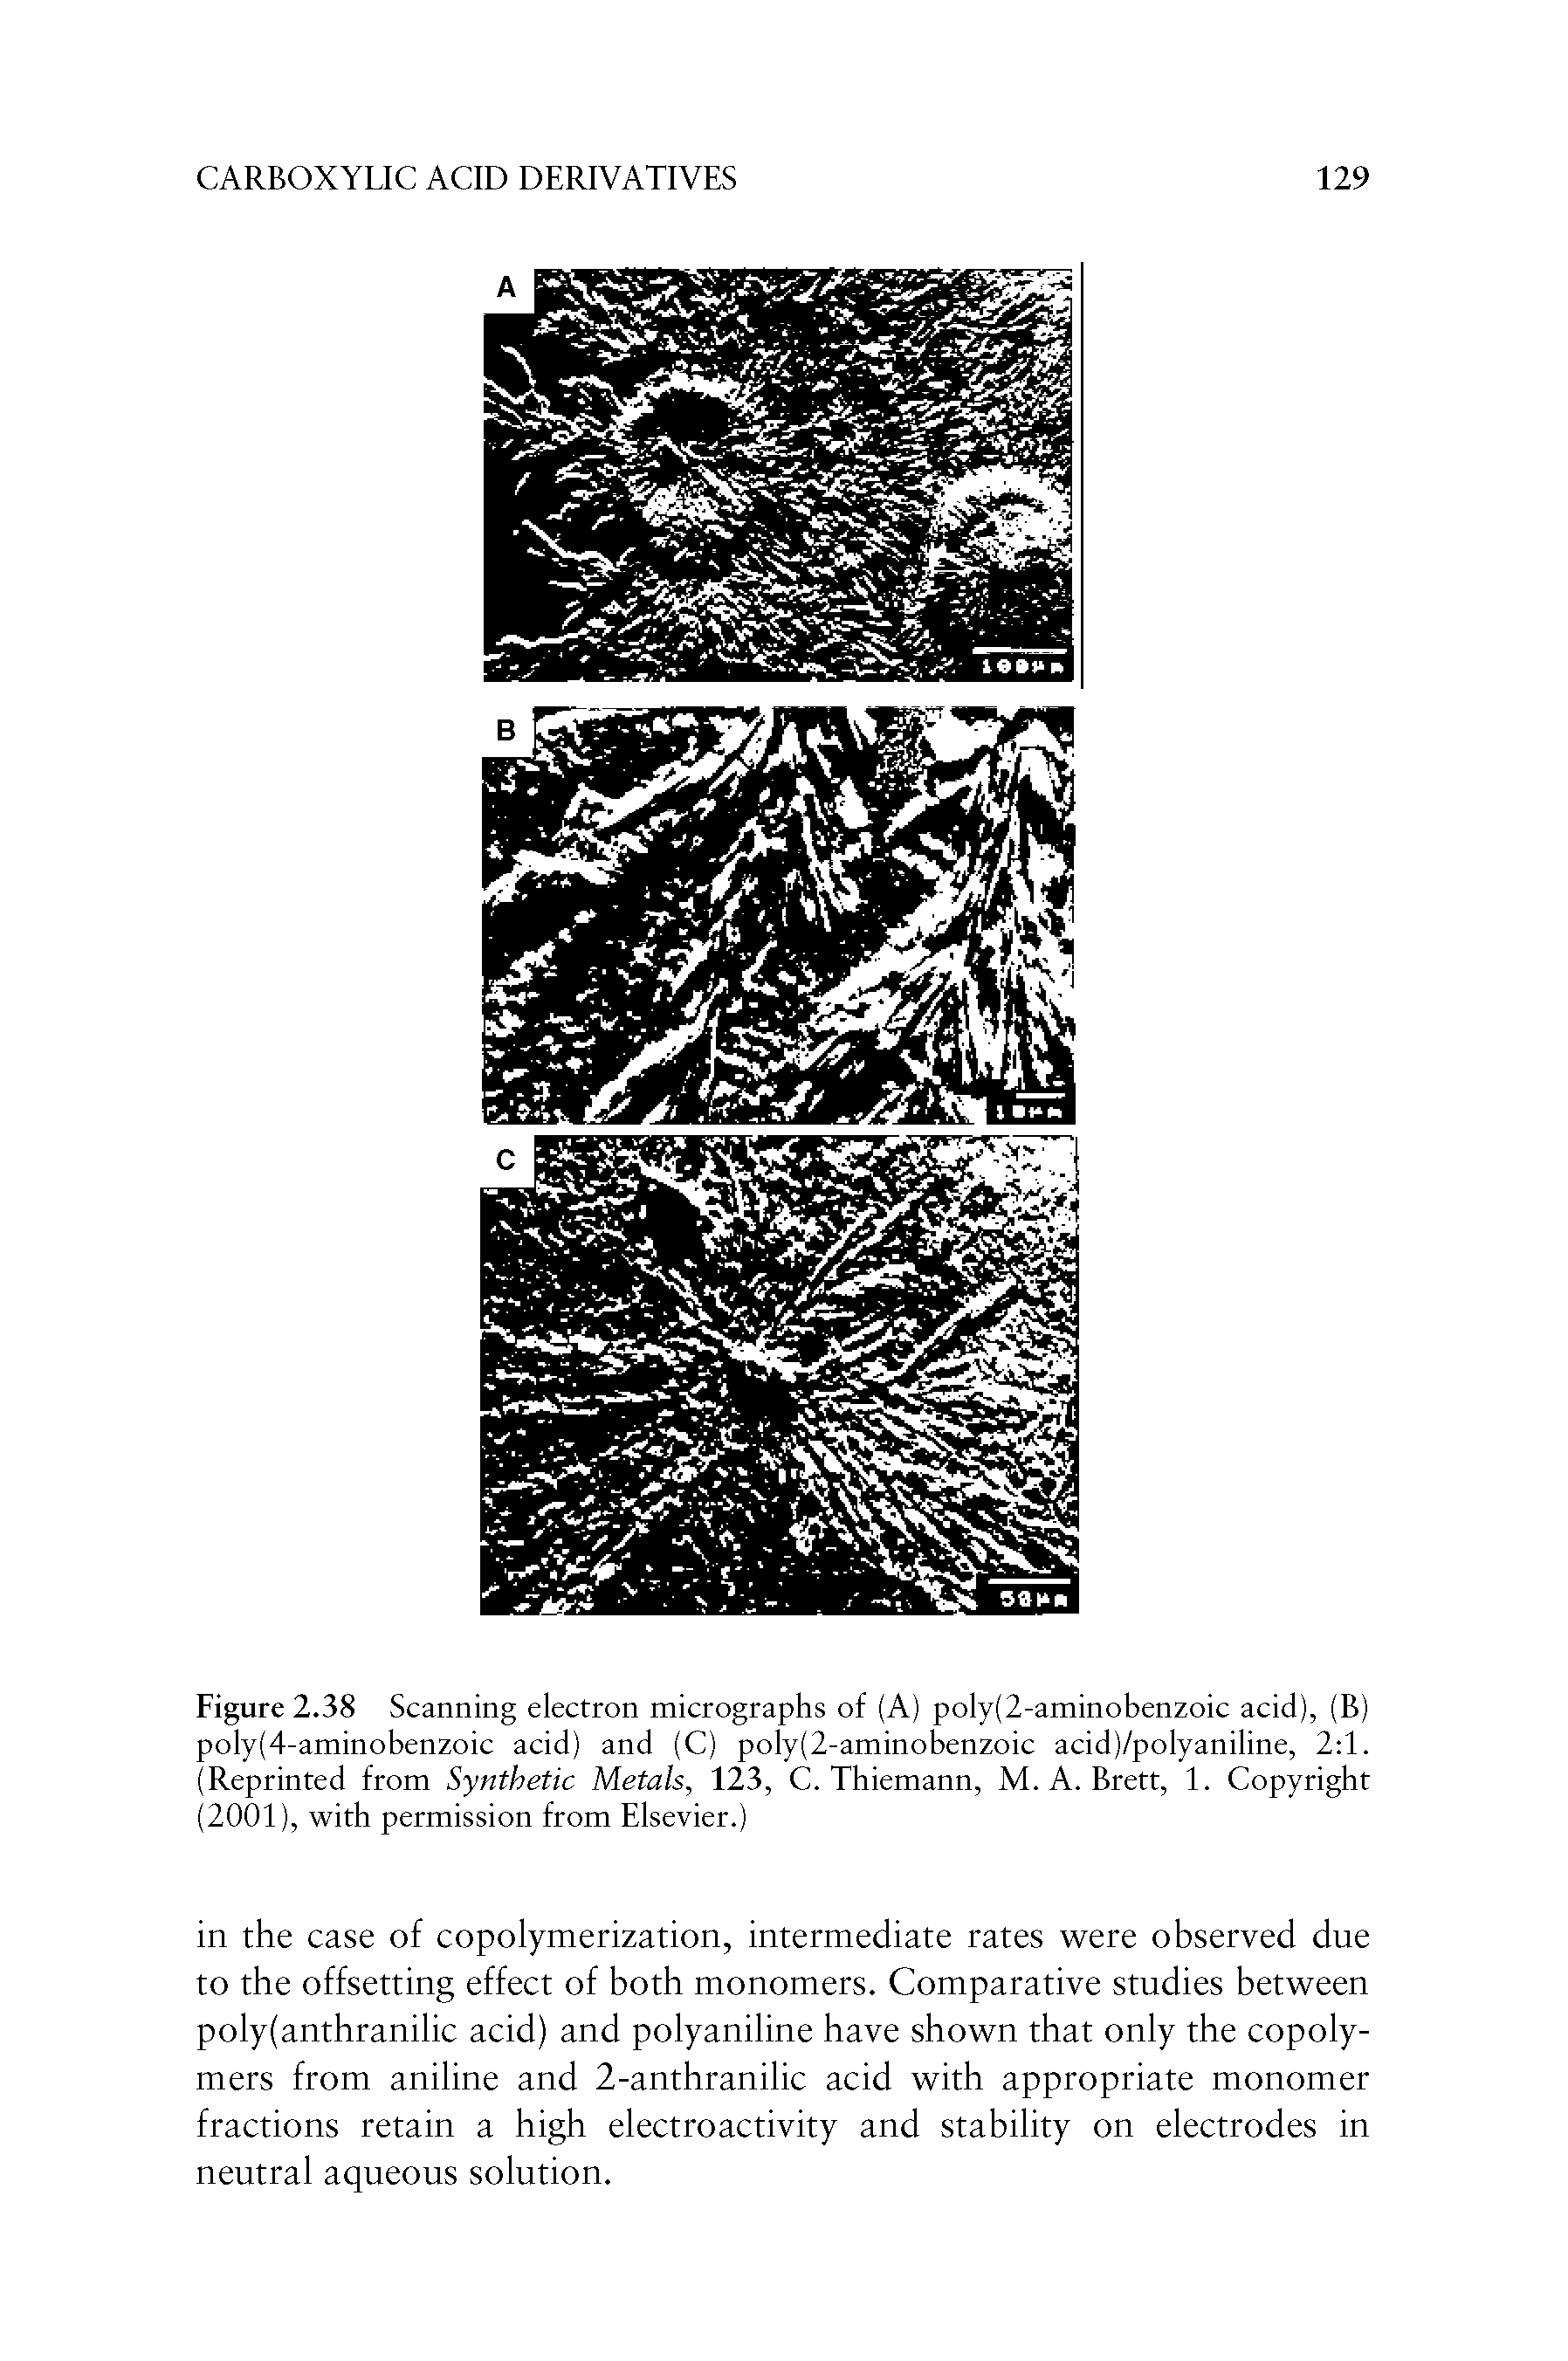 Figure 2.38 Scanning electron micrographs of (A) poly(2-aminobenzoic acid), (B) poly(4-aminobenzoic acid) and (C) poly(2-aminobenzoic acid)/polyaniline, 2 1. (Reprinted from Synthetic Metals, 123, C. Thiemann, M. A. Brett, 1. Copyright (2001), with permission from Elsevier.)...